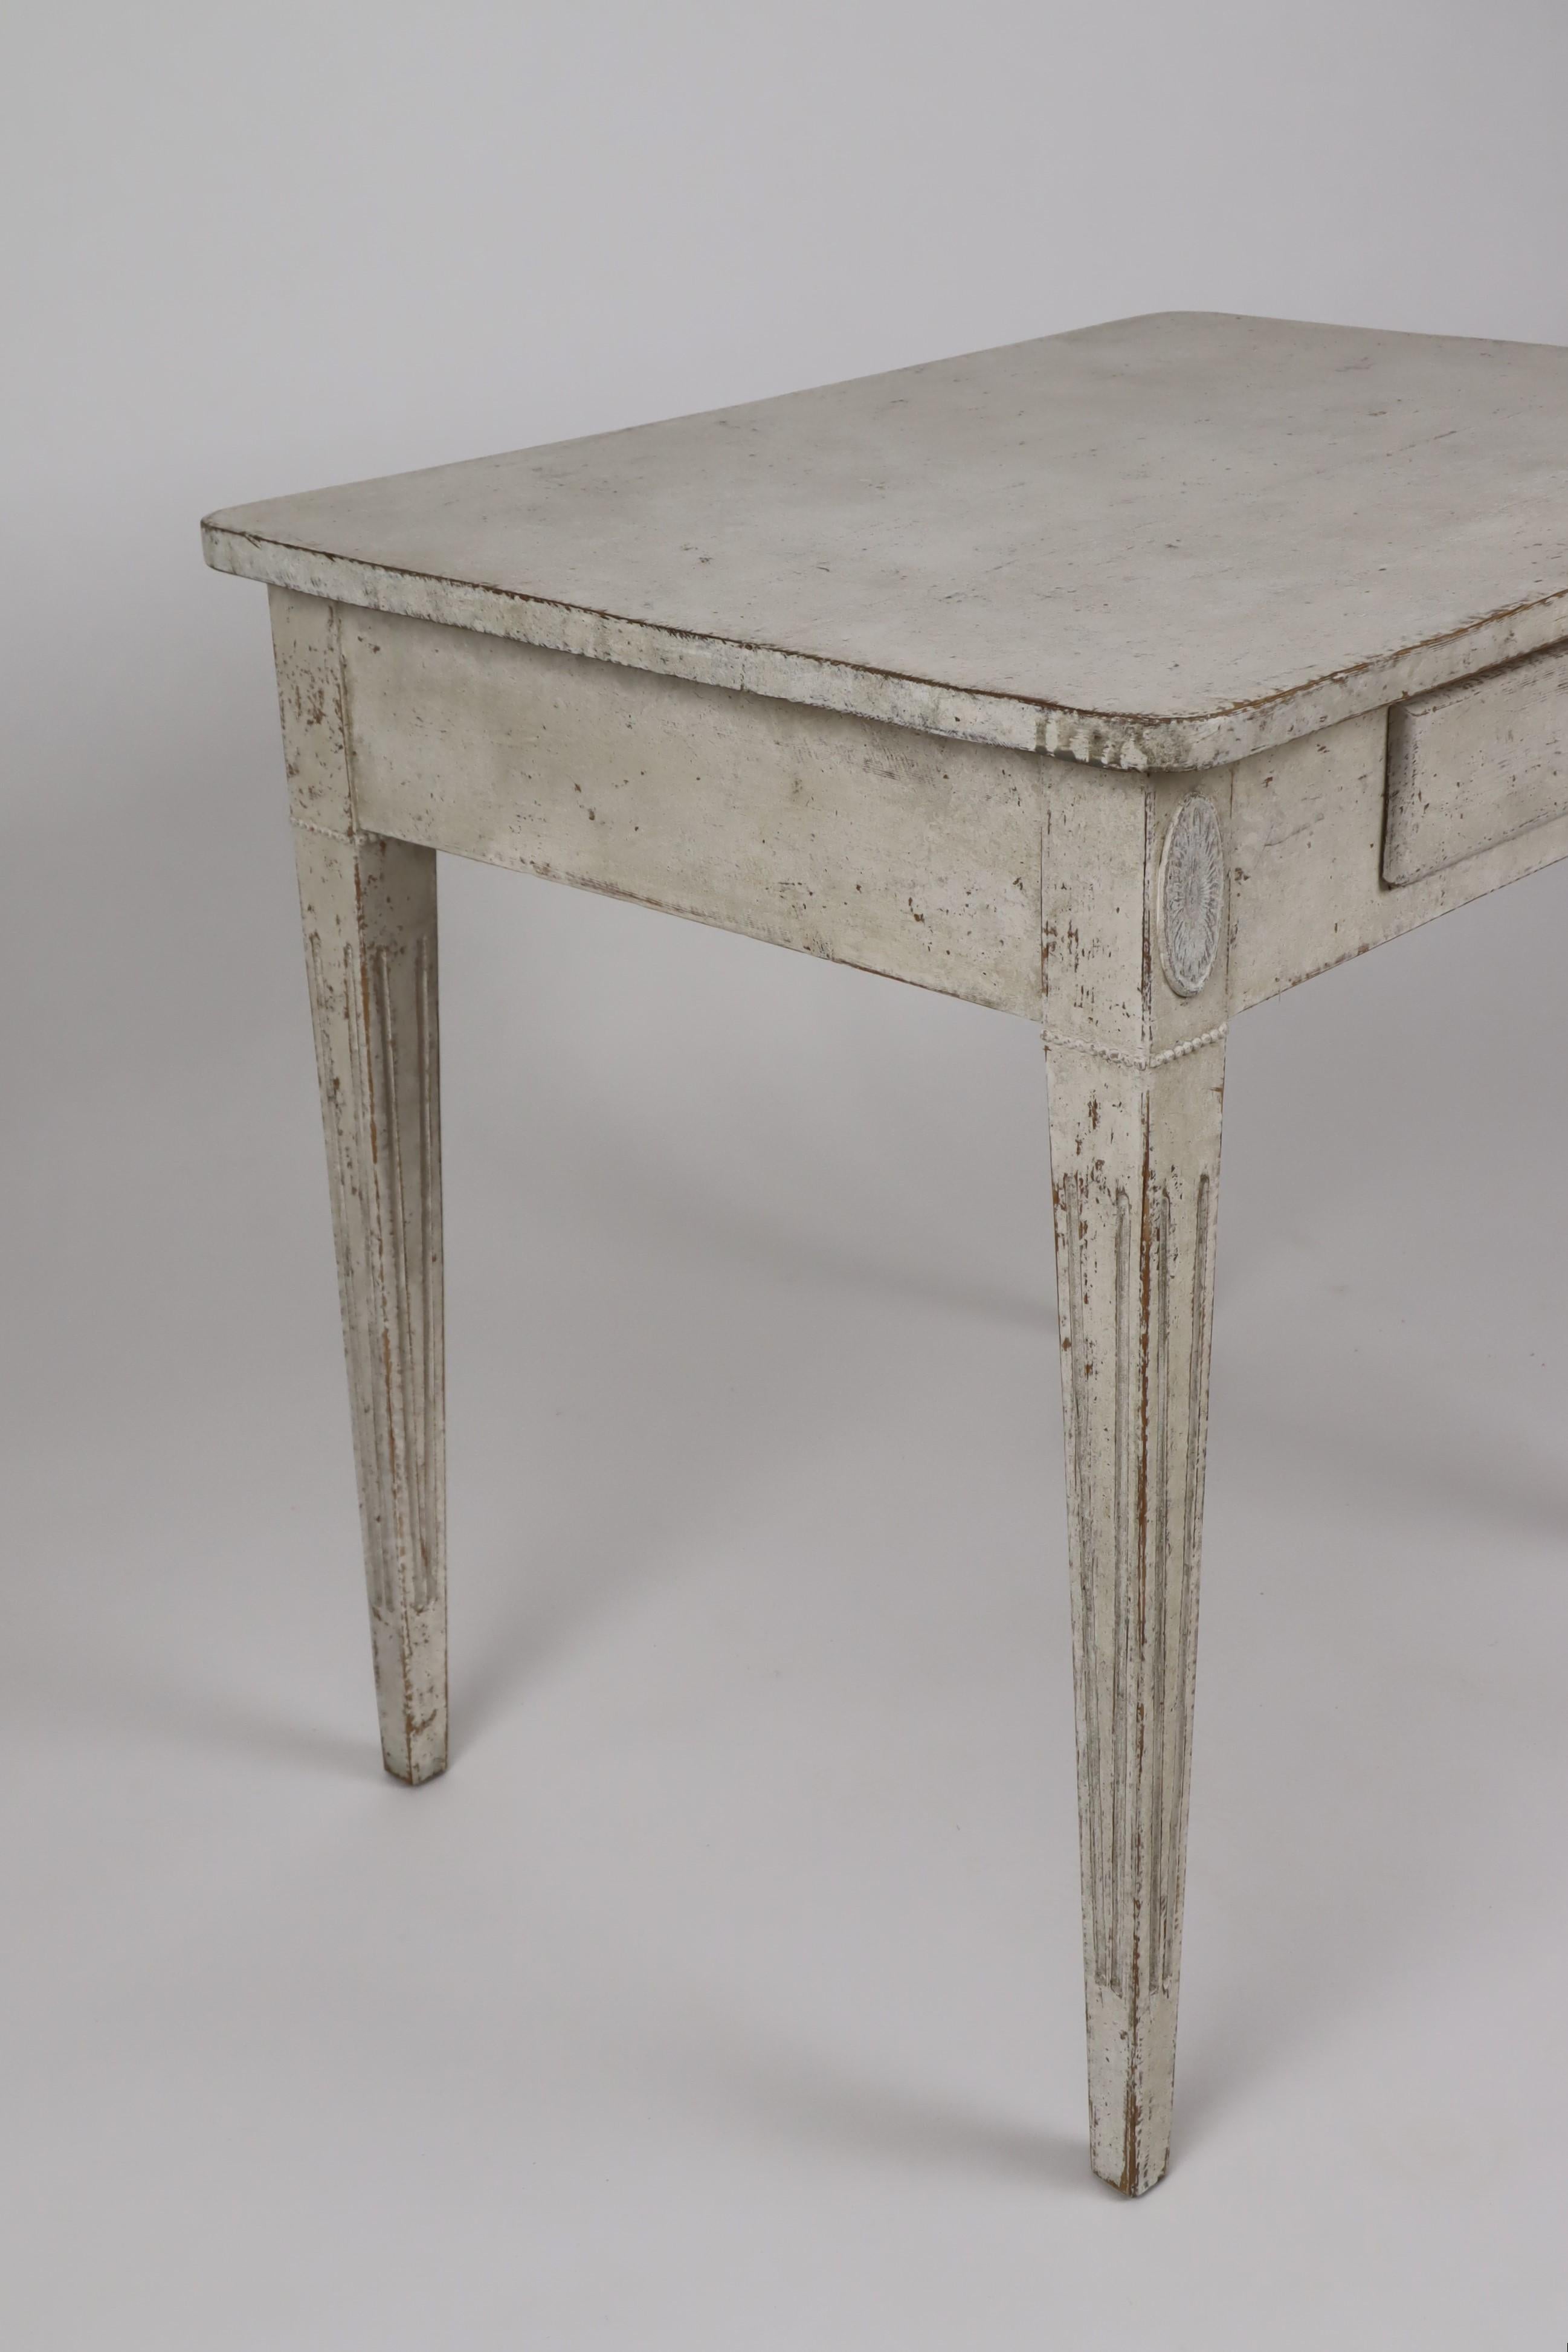 Swedish Gustavian Style 1850s Painted Desk with Single Drawer and Tapered Legs For Sale 1